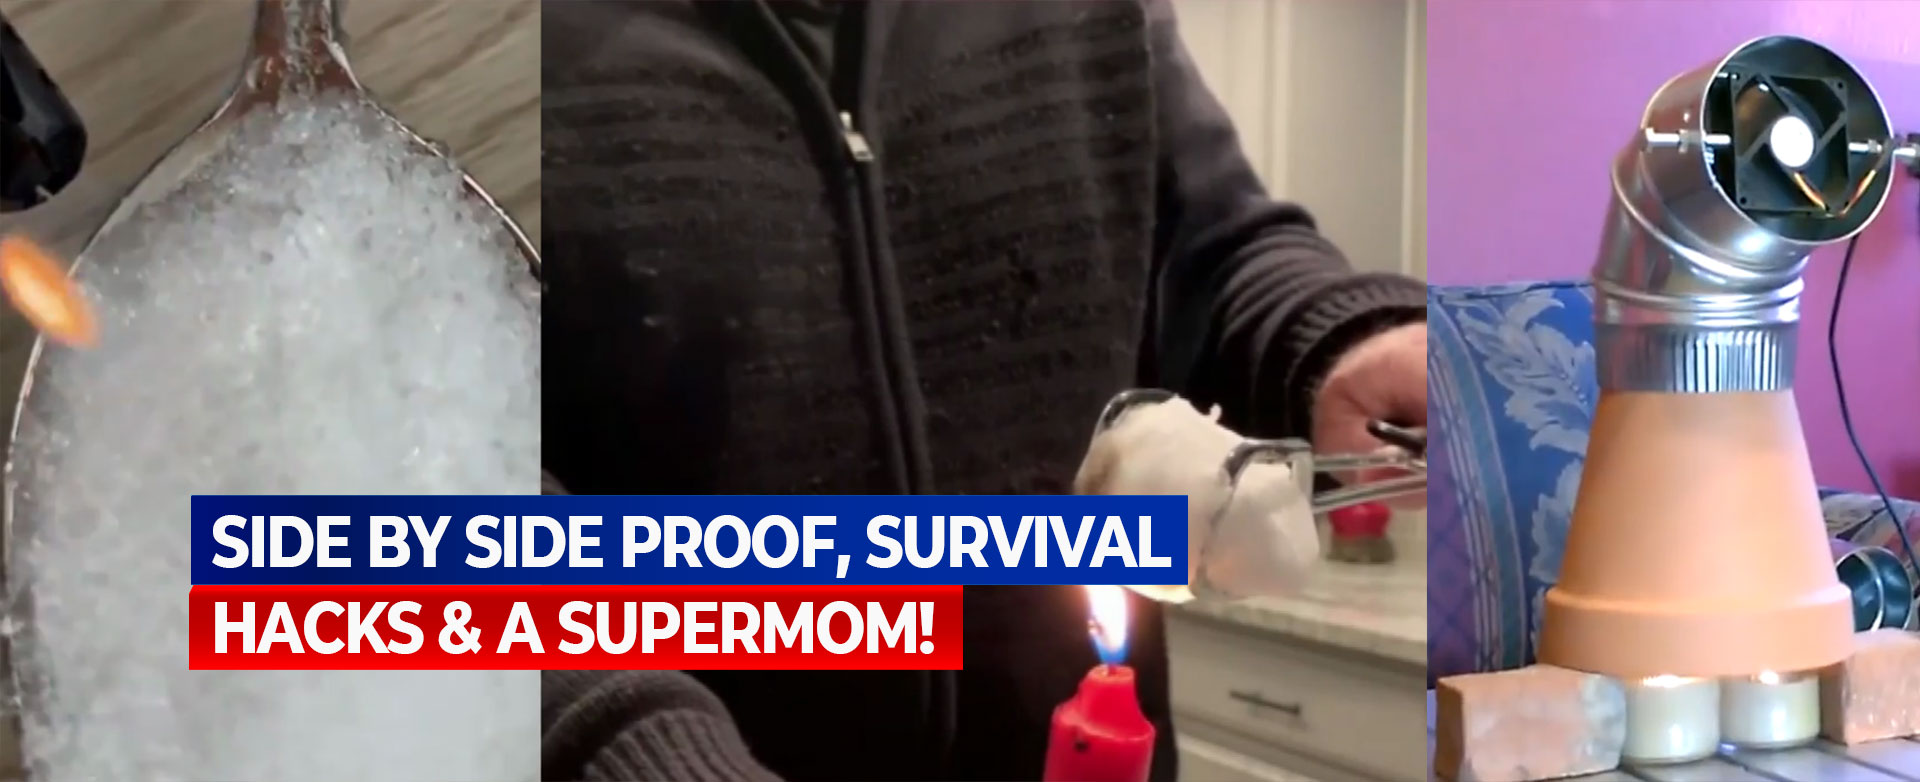 MyPatriotsNetwork-Side By Side Proof, Survival Hacks & A Supermom! – February 20, 2021 Update